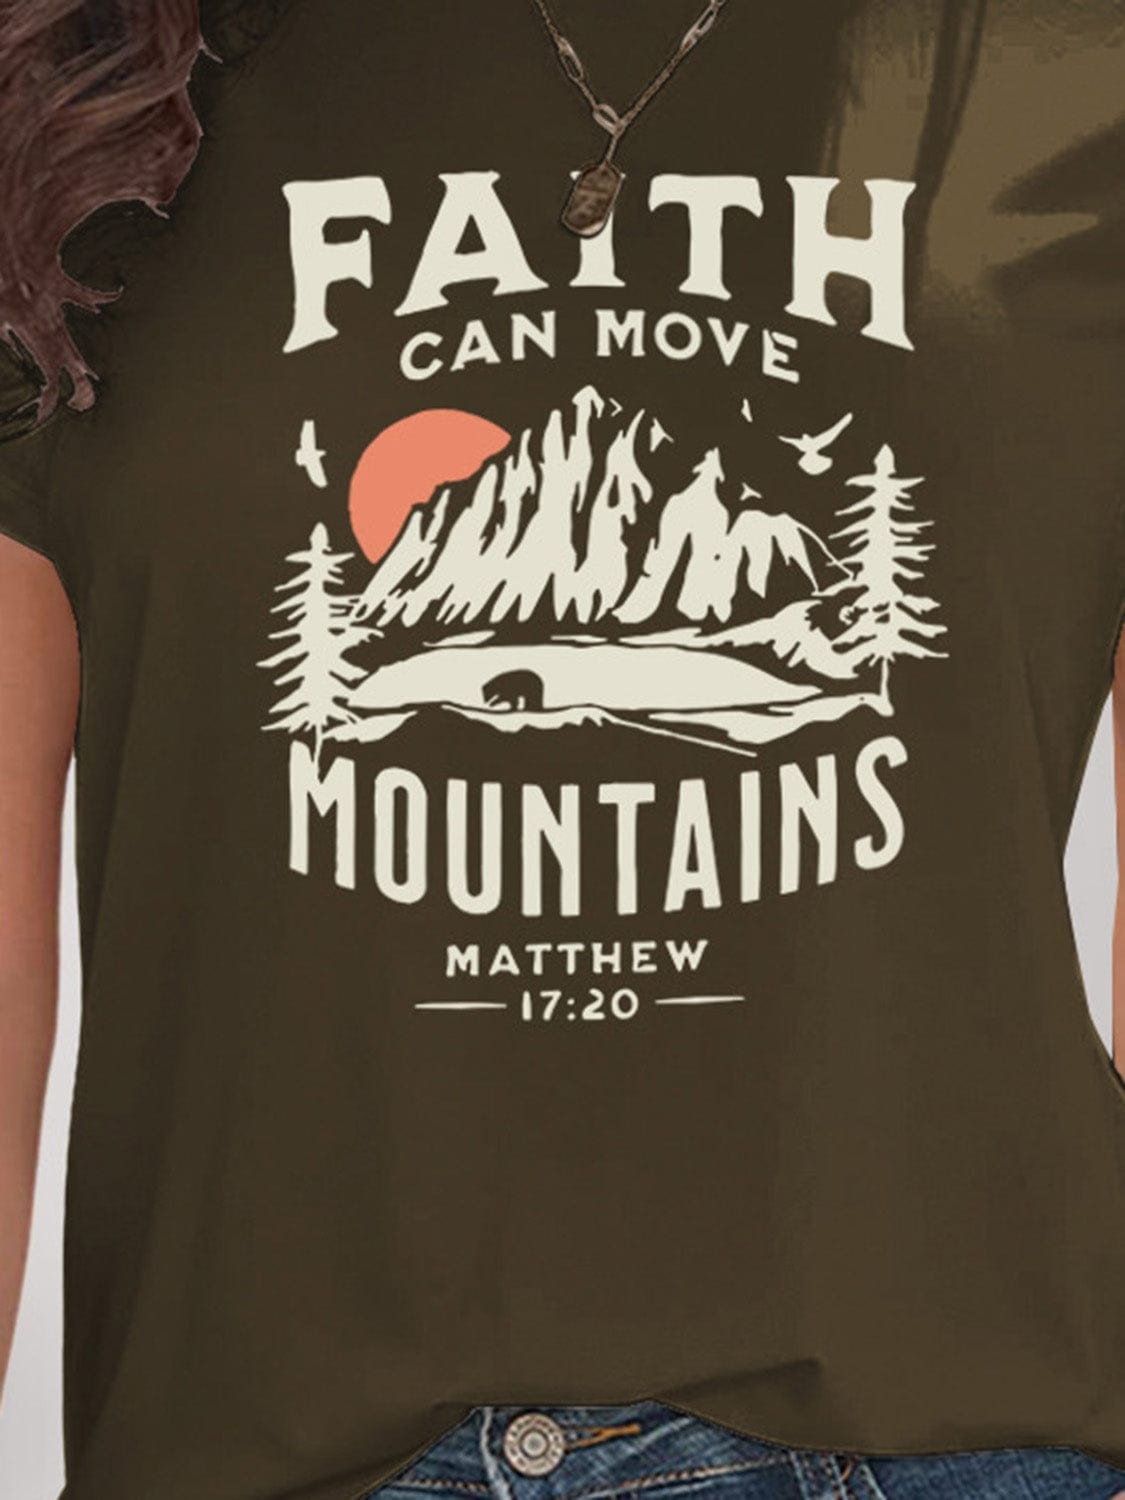 Women's Faith Can Move Mountains Graphic Round Neck Short Sleeve T-Shirt Shirts & Tops Pioneer Kitty Market   